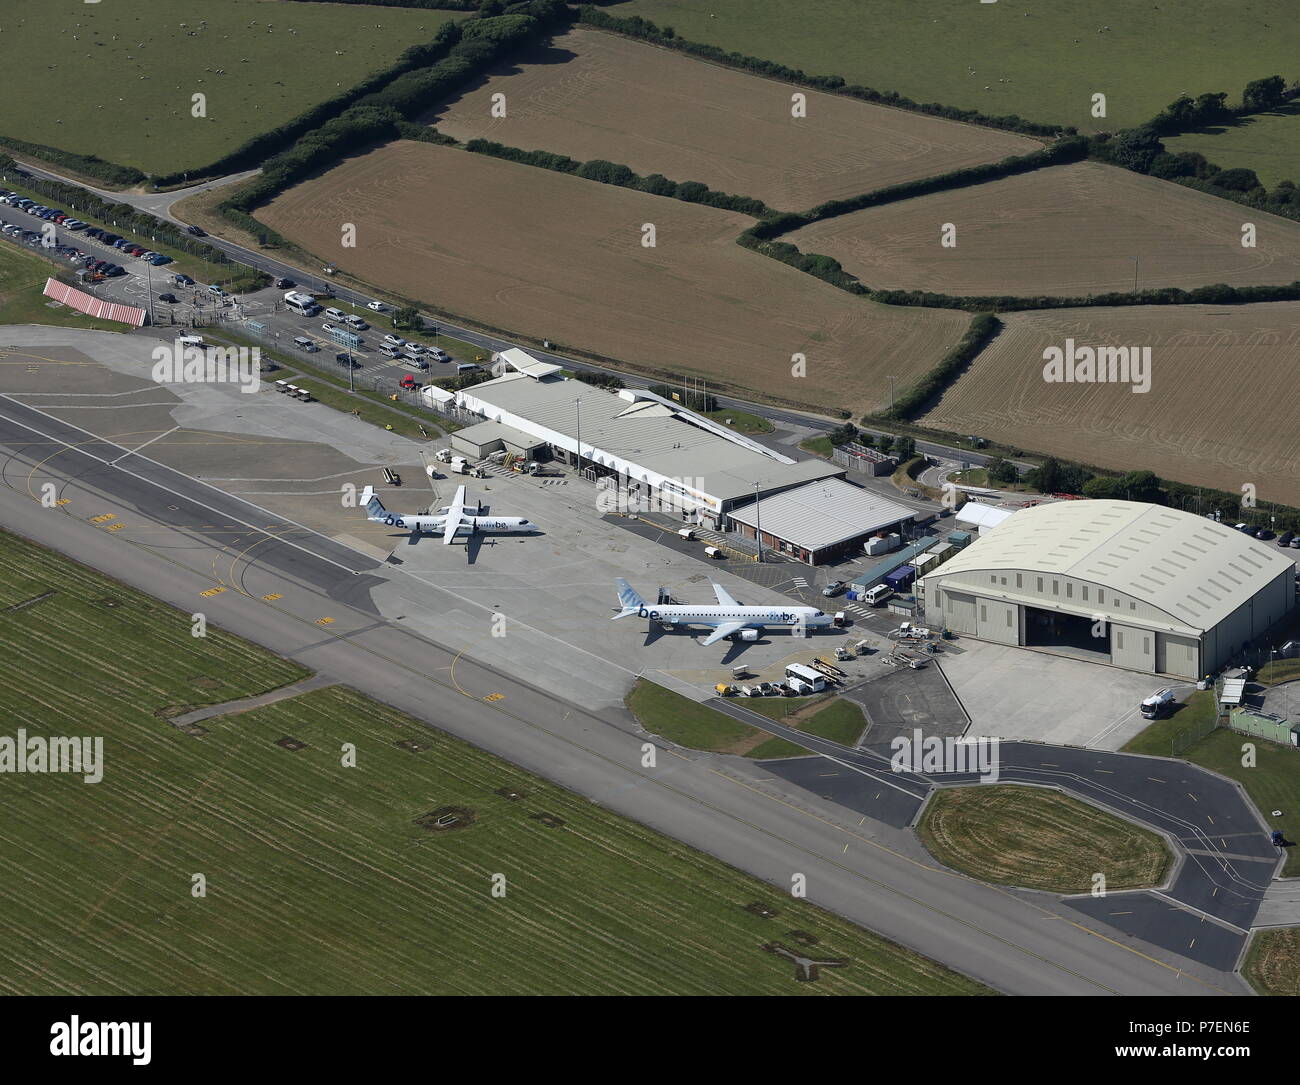 Aerial view of the Newquay (Cornwall) airport terminal with two Flybe aircraft on the ramp Stock Photo